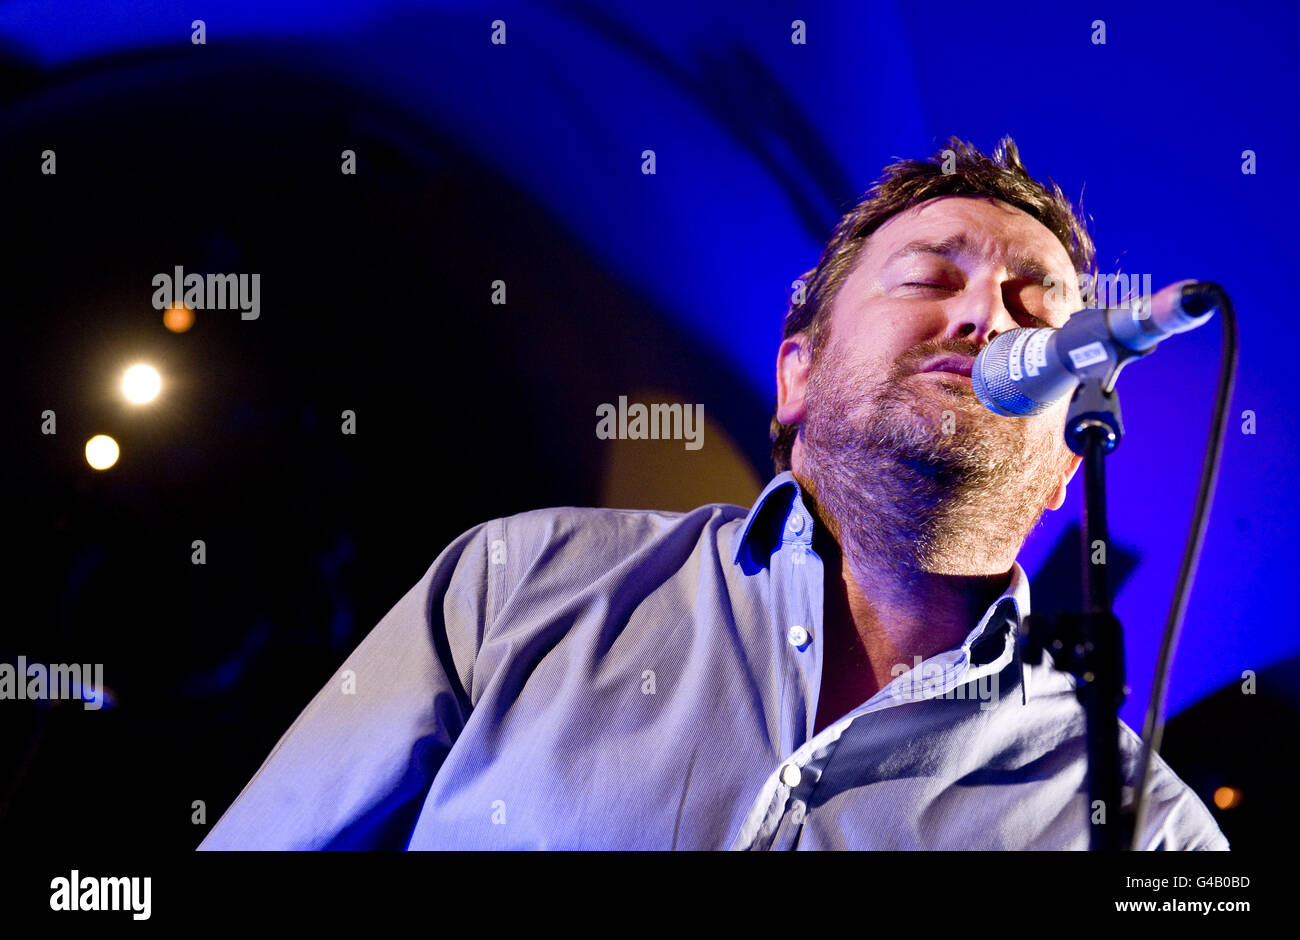 Elbow In Concert London Guy Garvey During Elbows Live Set In The